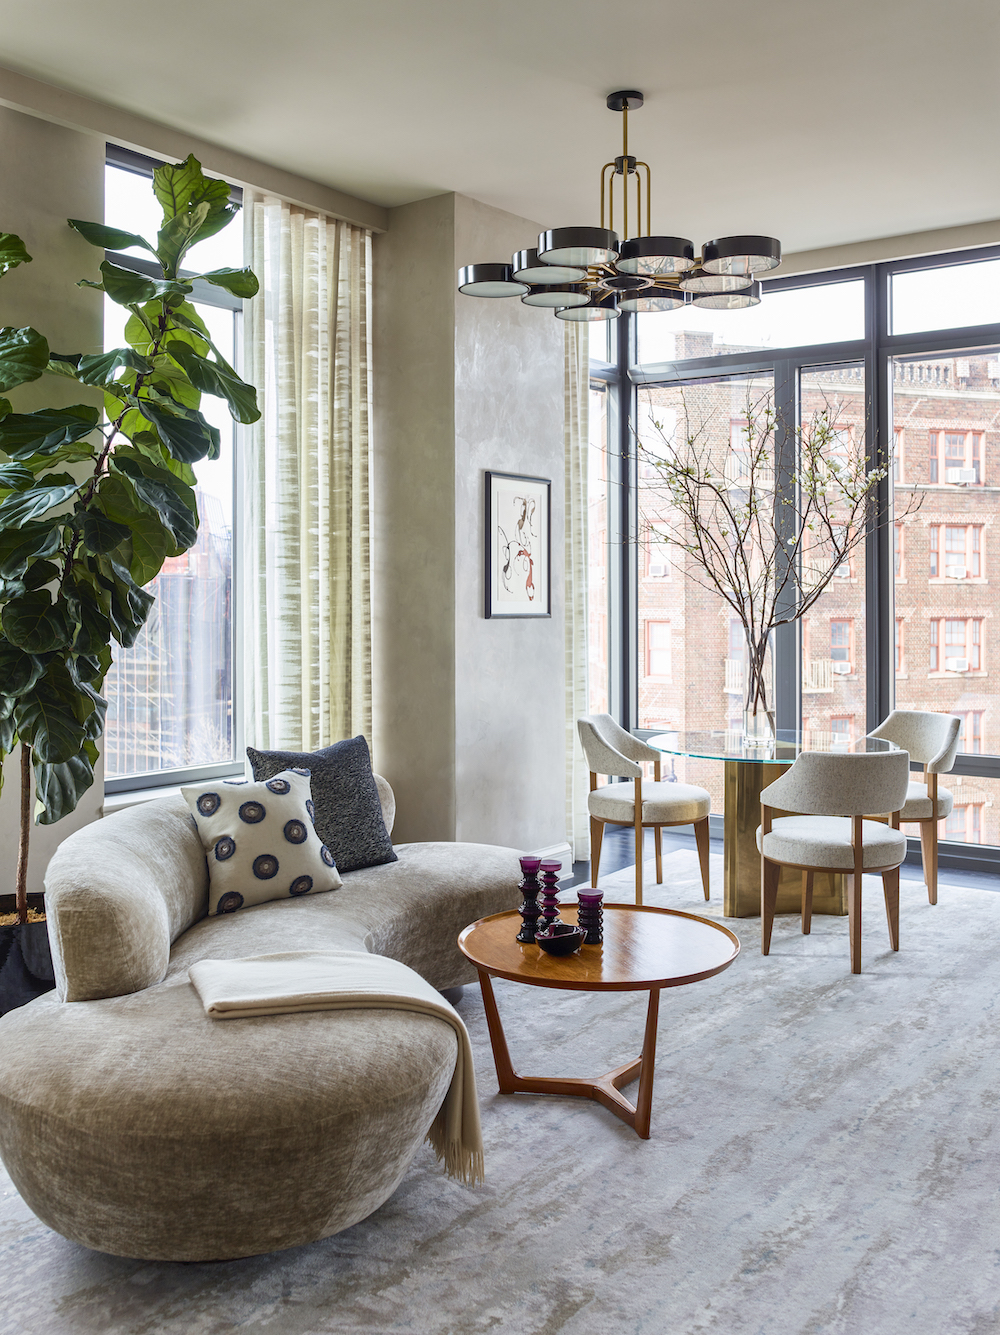 A West Village apartment interior with design by Gideon Mendelson in Effect Magazine